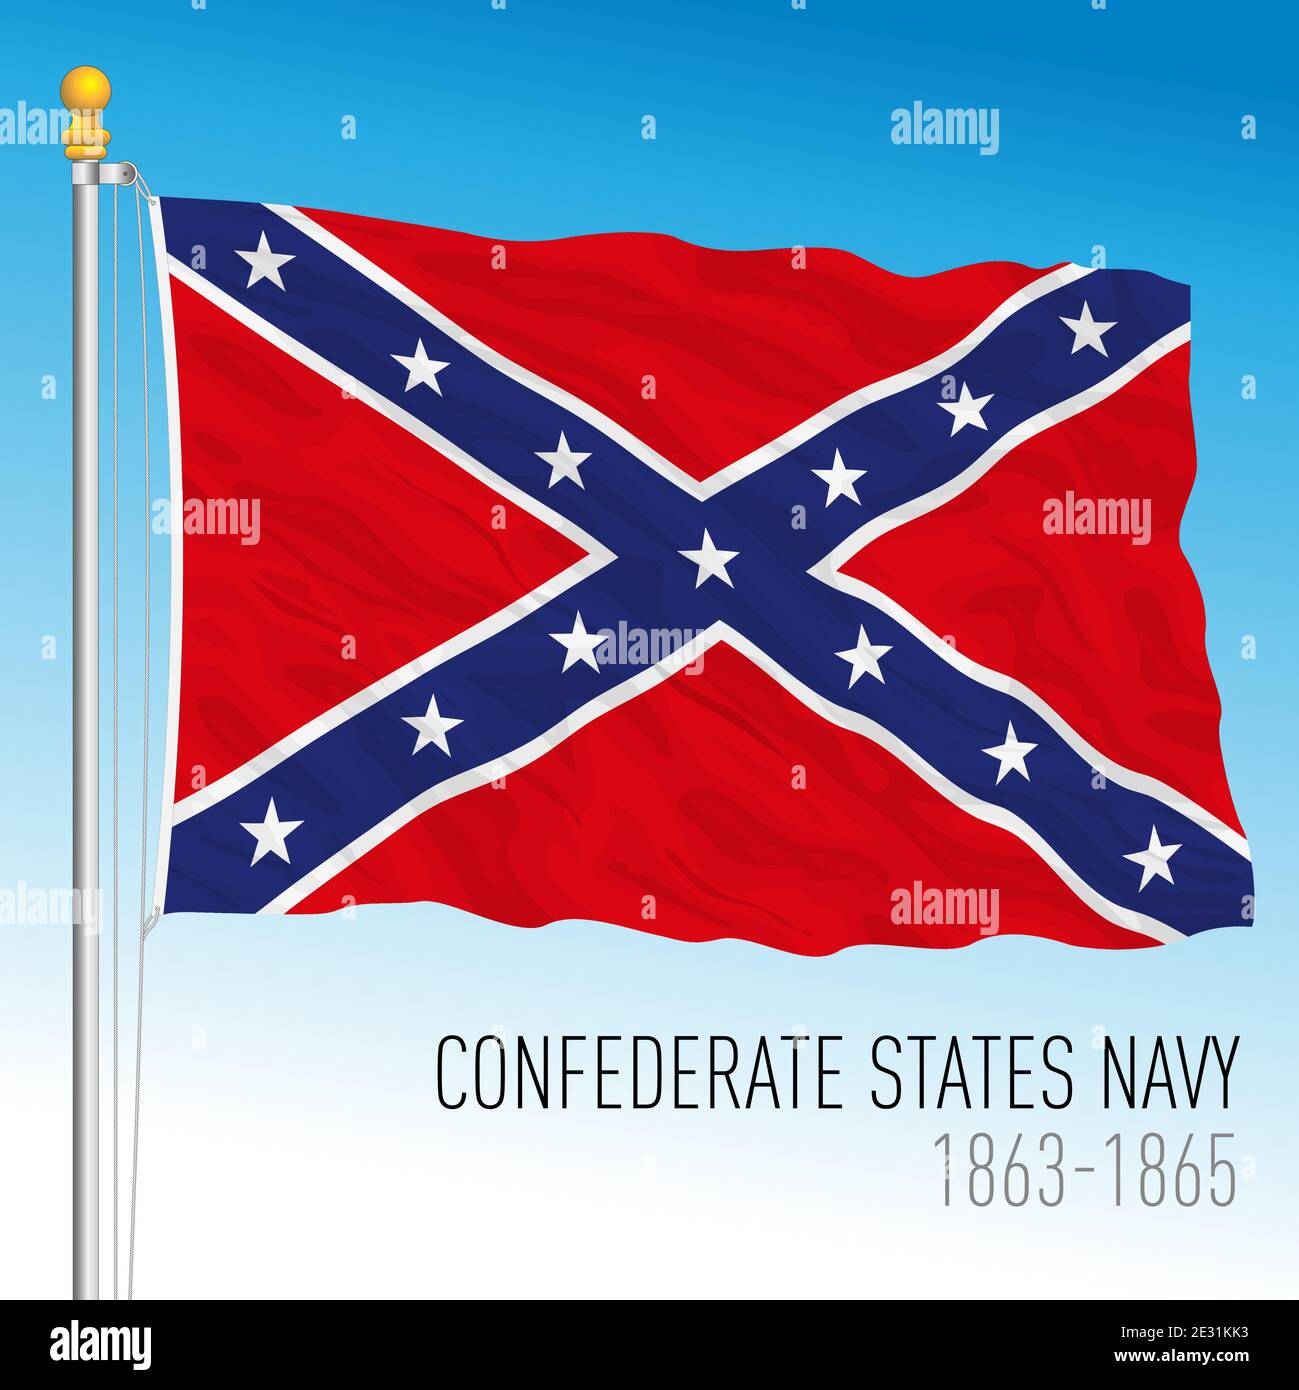 Confederate states historical navy flag, 1863 - 1865, United States, vector illustration Stock Vector